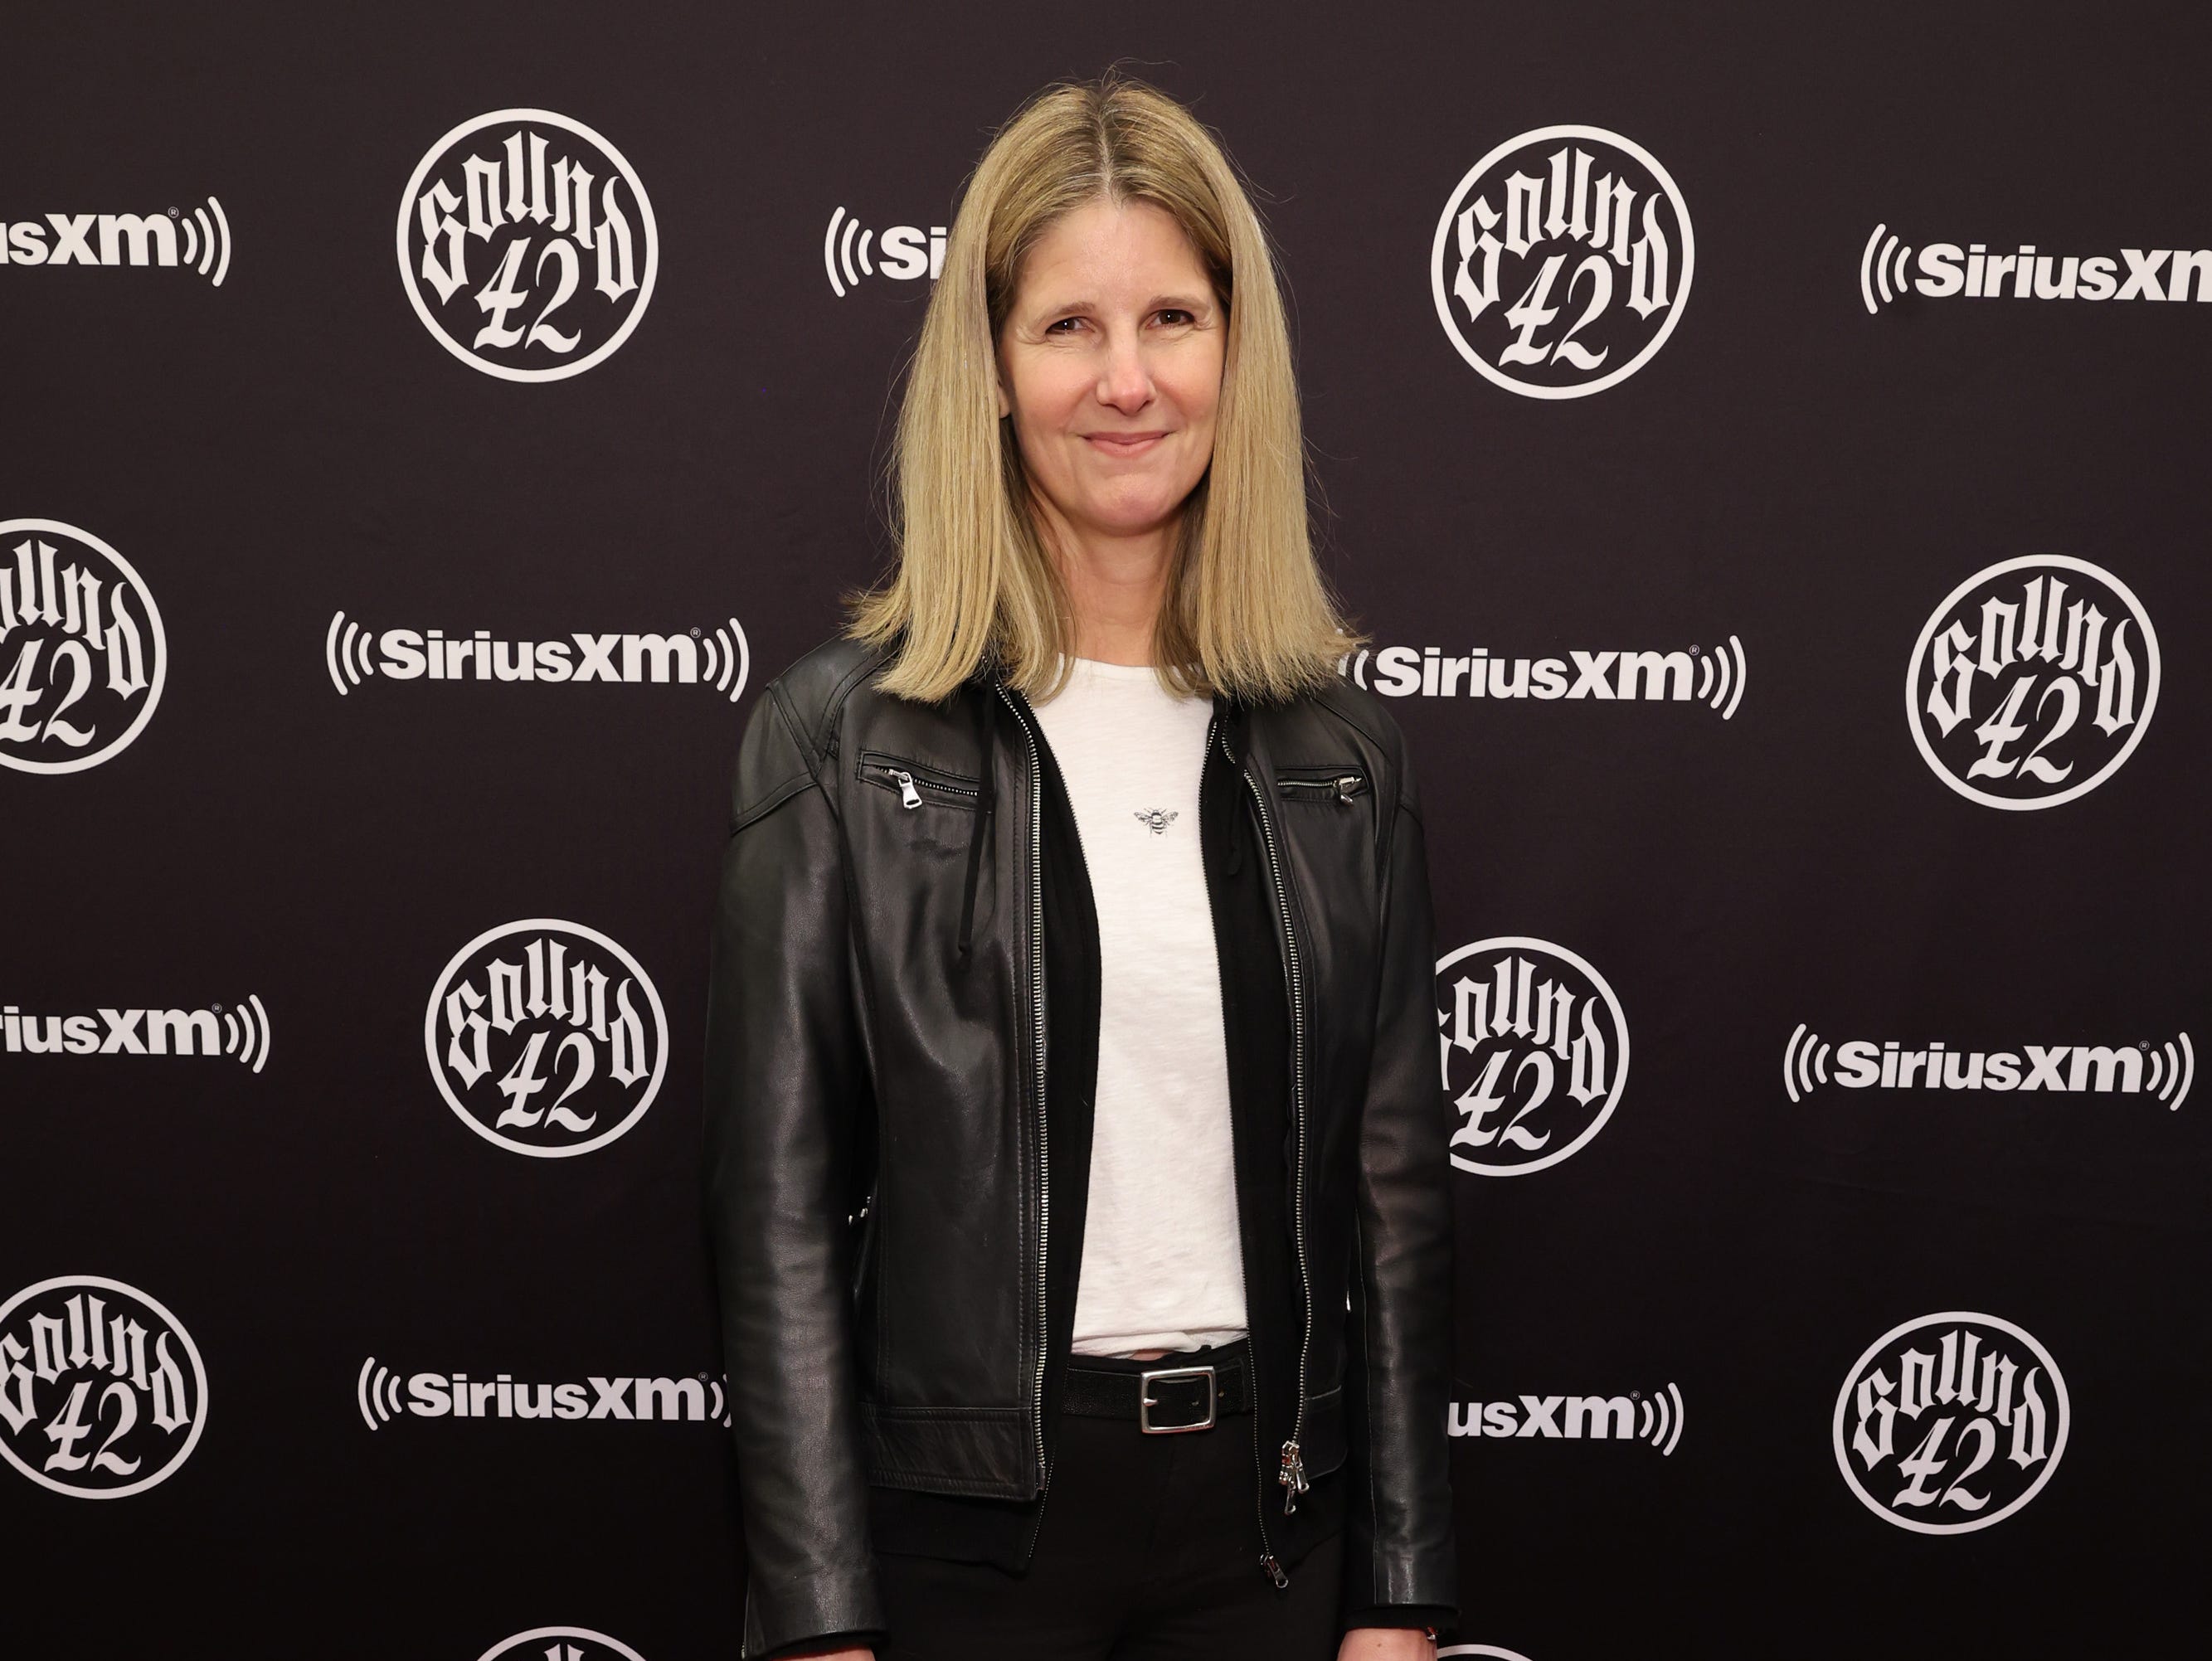 <p>The radio company said March 6th that it was cutting 8% of its staff or 475 roles according to a <a href="https://investor.siriusxm.com/news-events/press-releases/detail/1936/a-message-from-jennifer-witz-ceo-of-siriusxm" rel="noopener">statement</a> posted on the company's website from CEO Jennifer Witz. </p><p>In the statement, Witz <a href="https://investor.siriusxm.com/news-events/press-releases/detail/1936/a-message-from-jennifer-witz-ceo-of-siriusxm" rel="noopener">said</a> "nearly every department" across the company will be impacted. </p><p>She also <a href="https://investor.siriusxm.com/news-events/press-releases/detail/1936/a-message-from-jennifer-witz-ceo-of-siriusxm" rel="noopener">noted</a> that those impacted will be contacted directly and will have the opportunity to speak with a leader from their department as well as a member of the company's People + Culture team. <br><br>Impacted employees will also be provided with exit packages that include severance, transitional health insurance benefits, Employee Advocacy Program continuation, and outplacement services, Witz <a href="https://investor.siriusxm.com/news-events/press-releases/detail/1936/a-message-from-jennifer-witz-ceo-of-siriusxm" rel="noopener">noted</a>.</p>